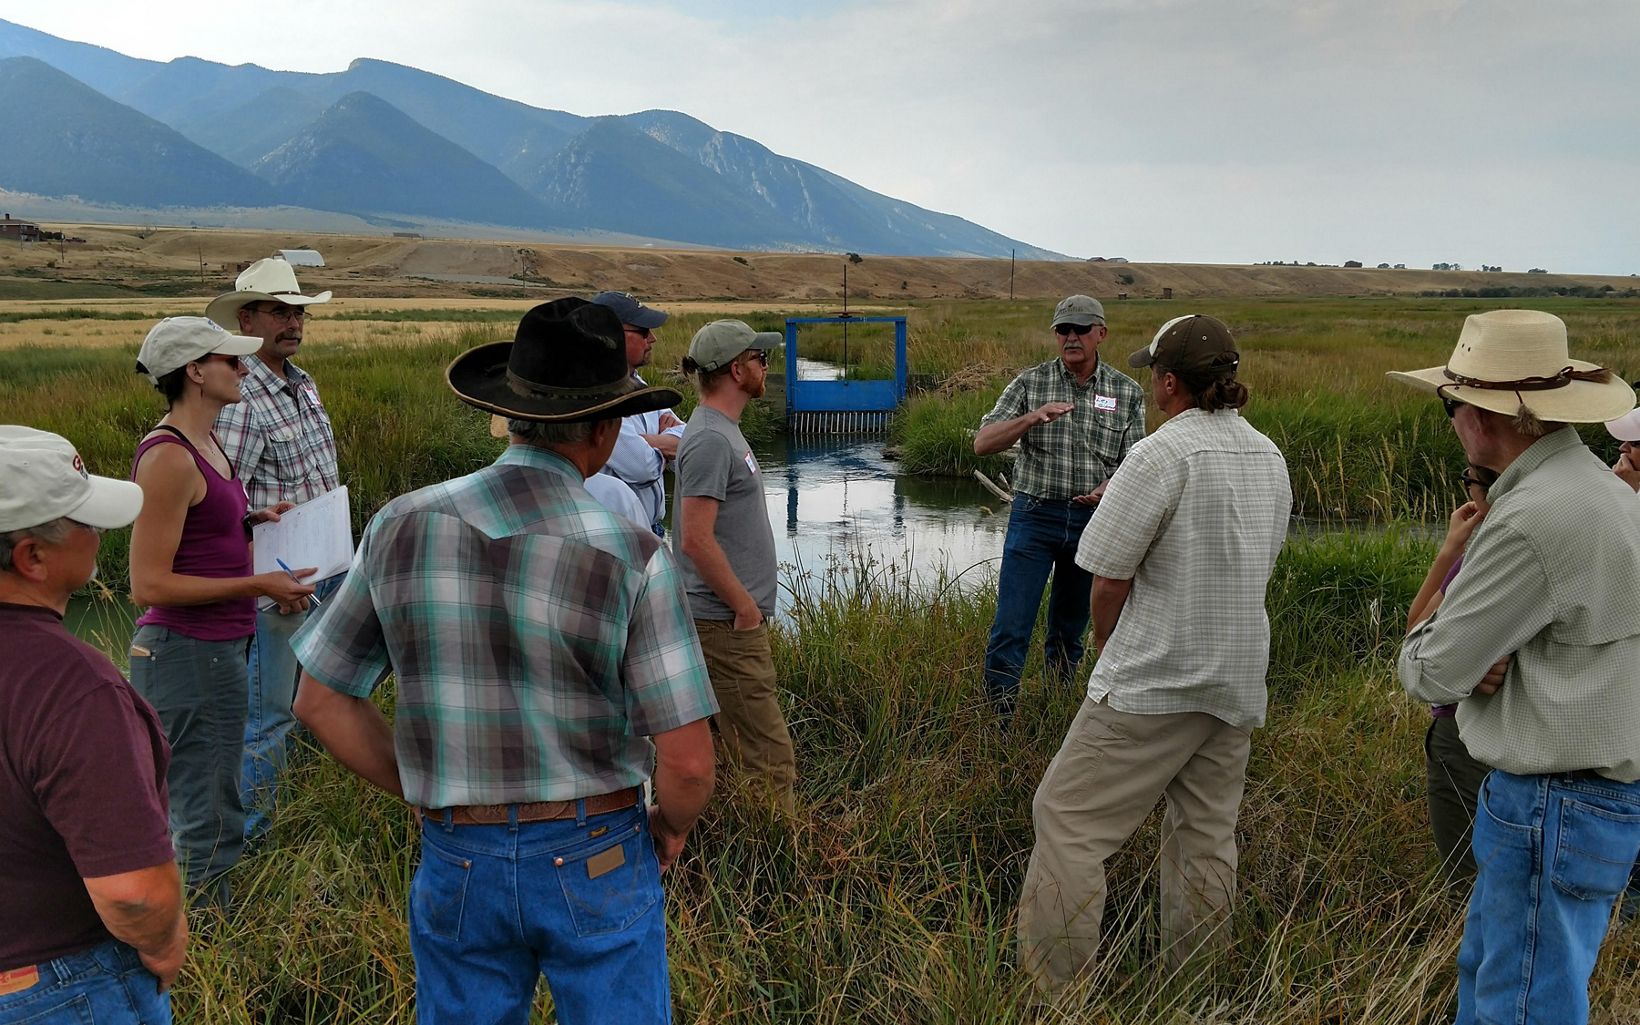 Ruby River ranching community The support of the local ranching community is essential to restoration of the Ruby River, much of which crosses private property. © Nathan Korb/TNC